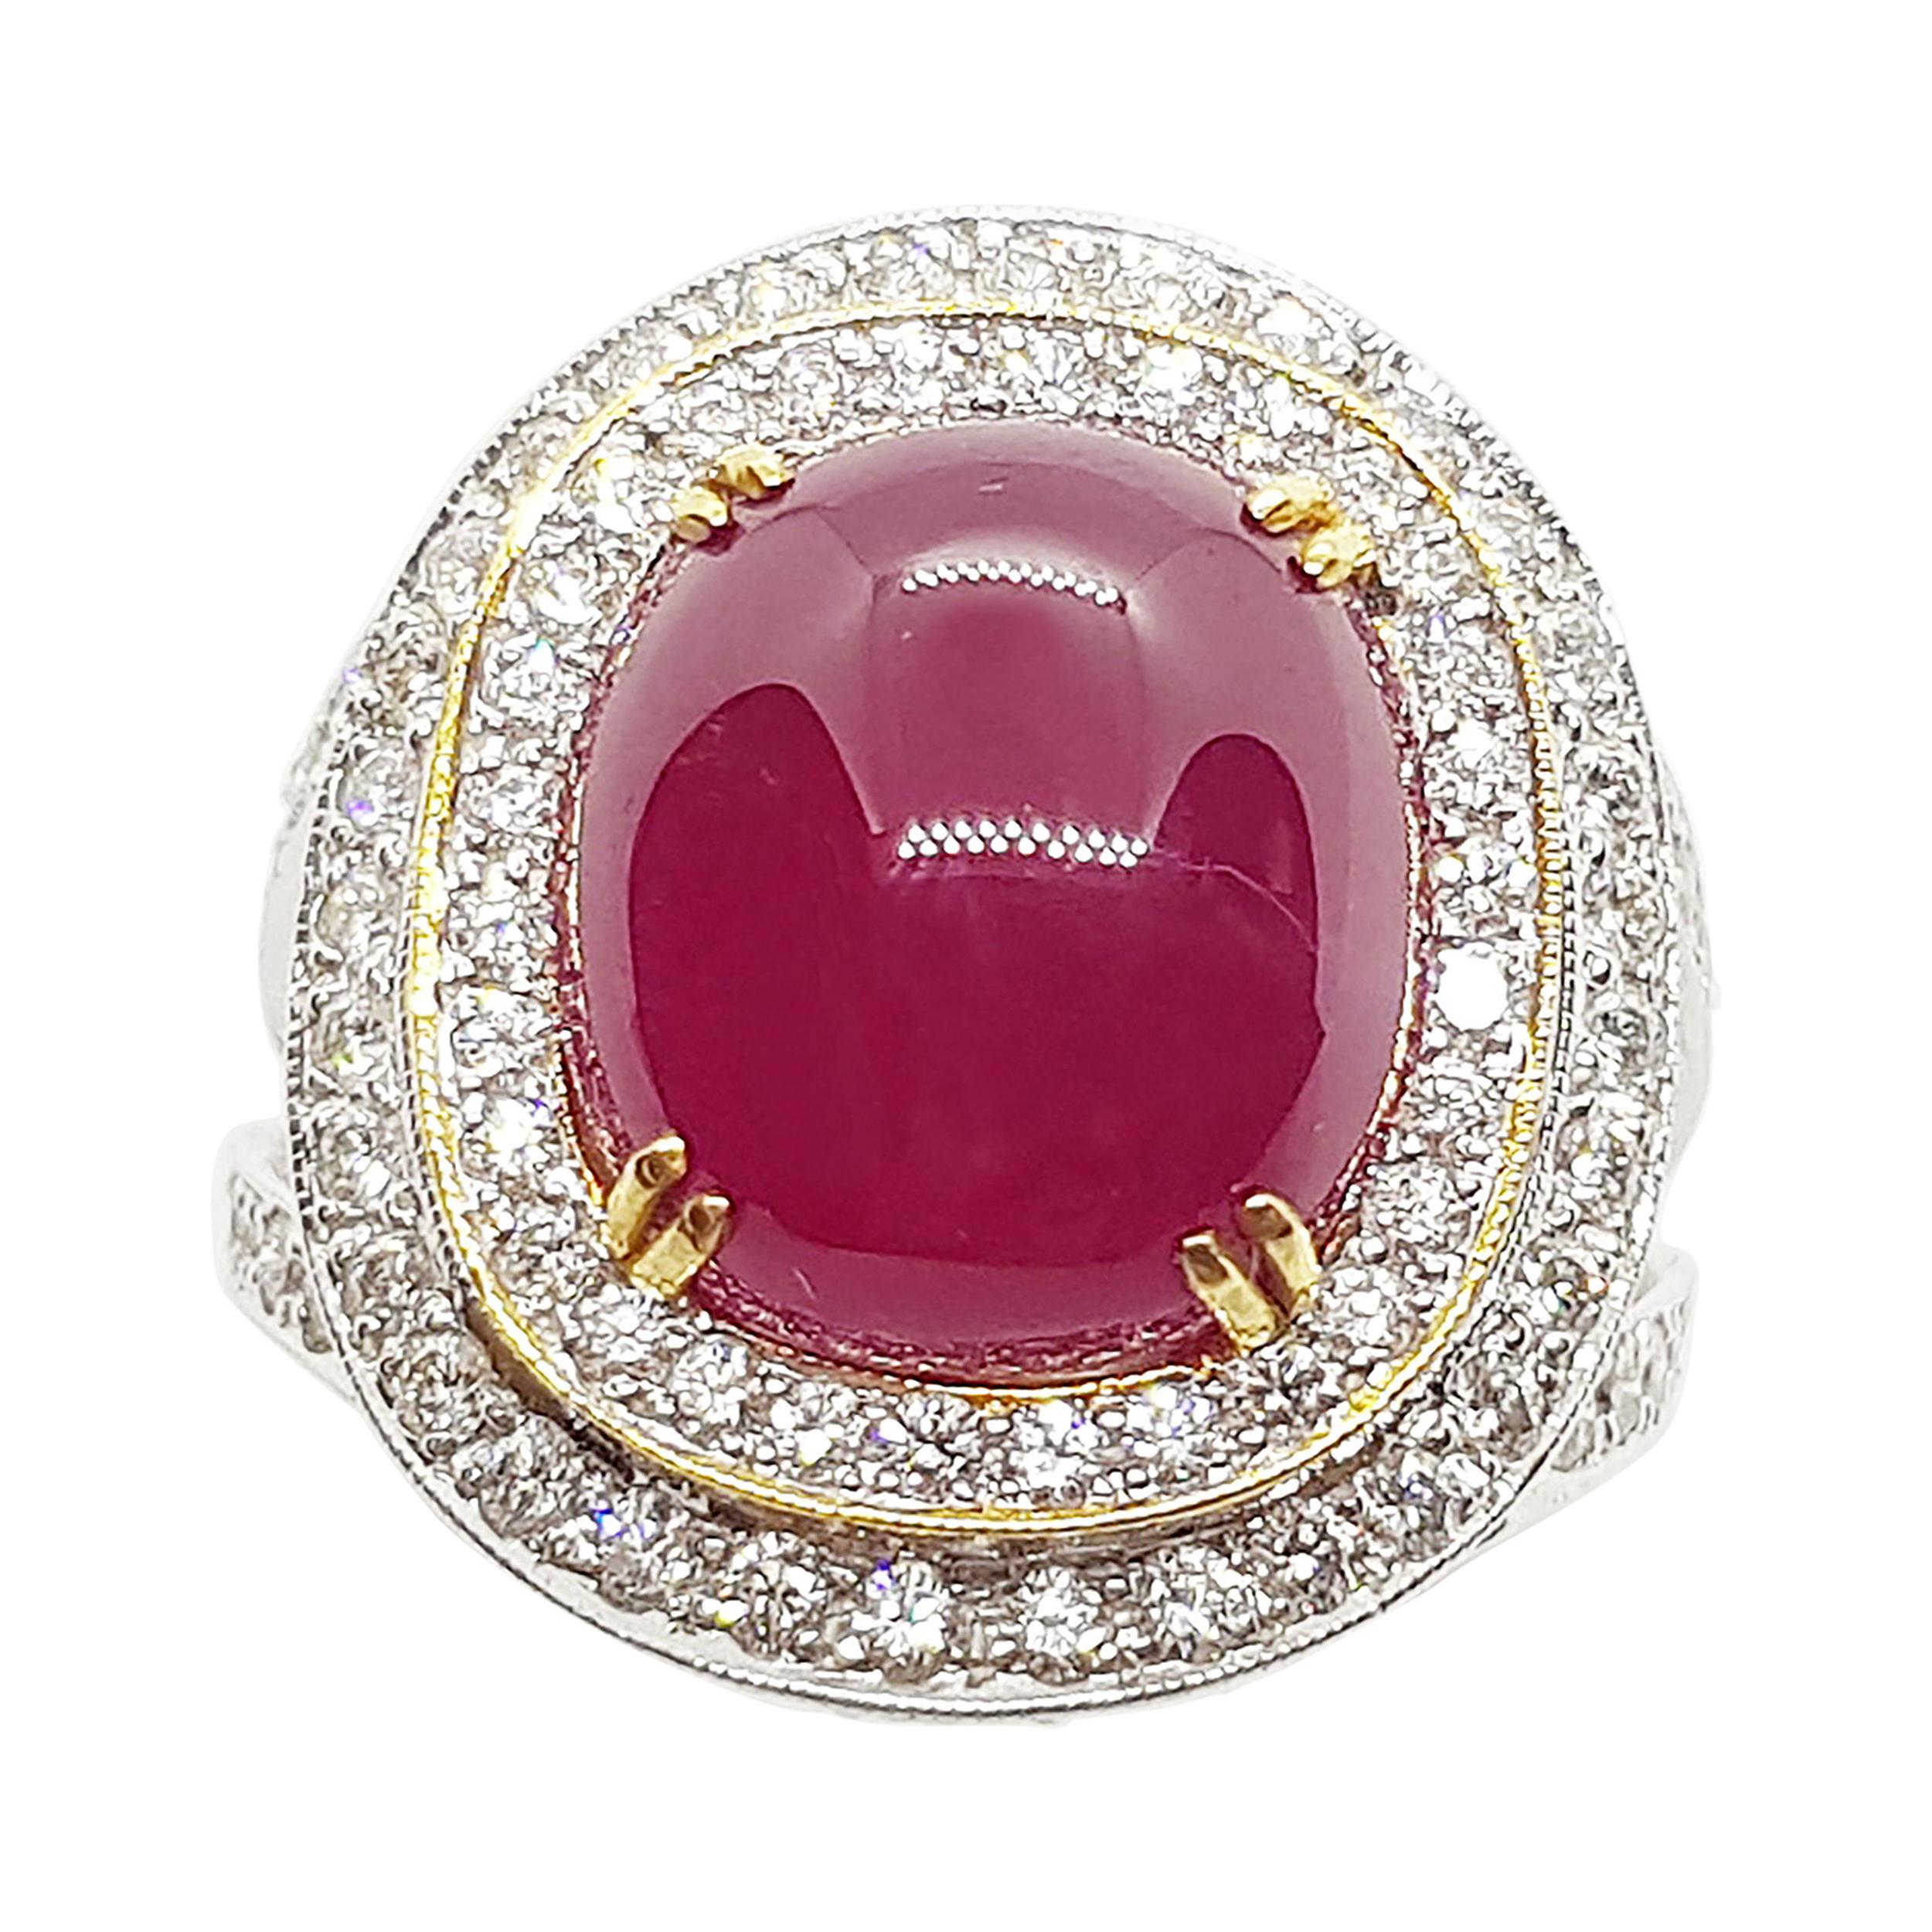 Cabochon Ruby with Diamond Ring Set in 18 Karat White Gold Settings